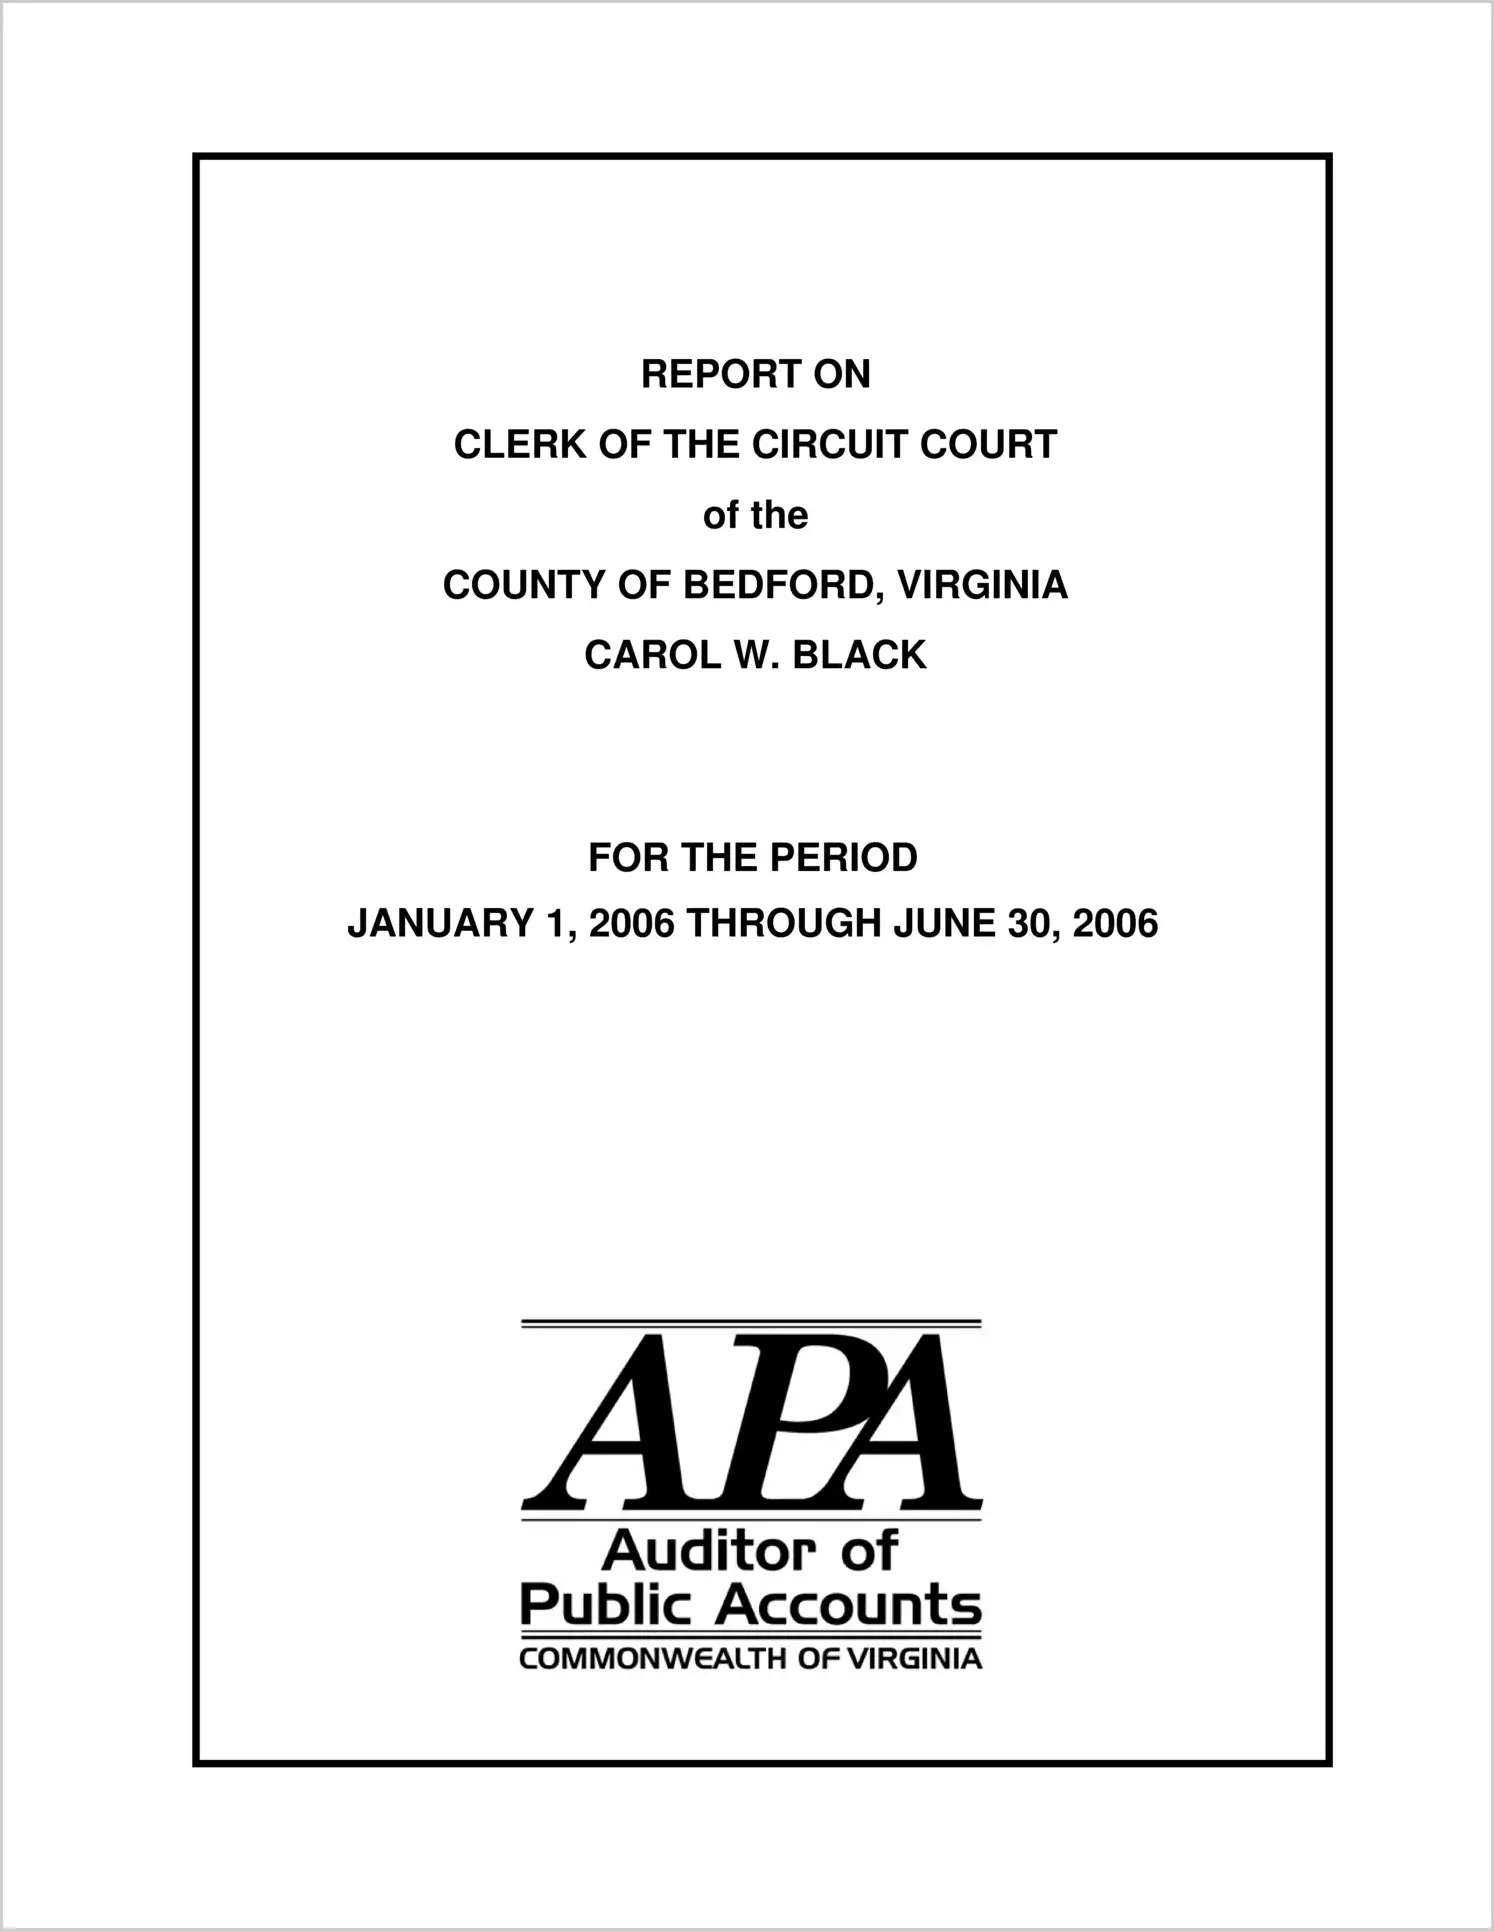 Statement of Assets and Liabilities of the Treasurer of the County of Bedford Turnover for the period January 1, 2006 through June 30, 2006